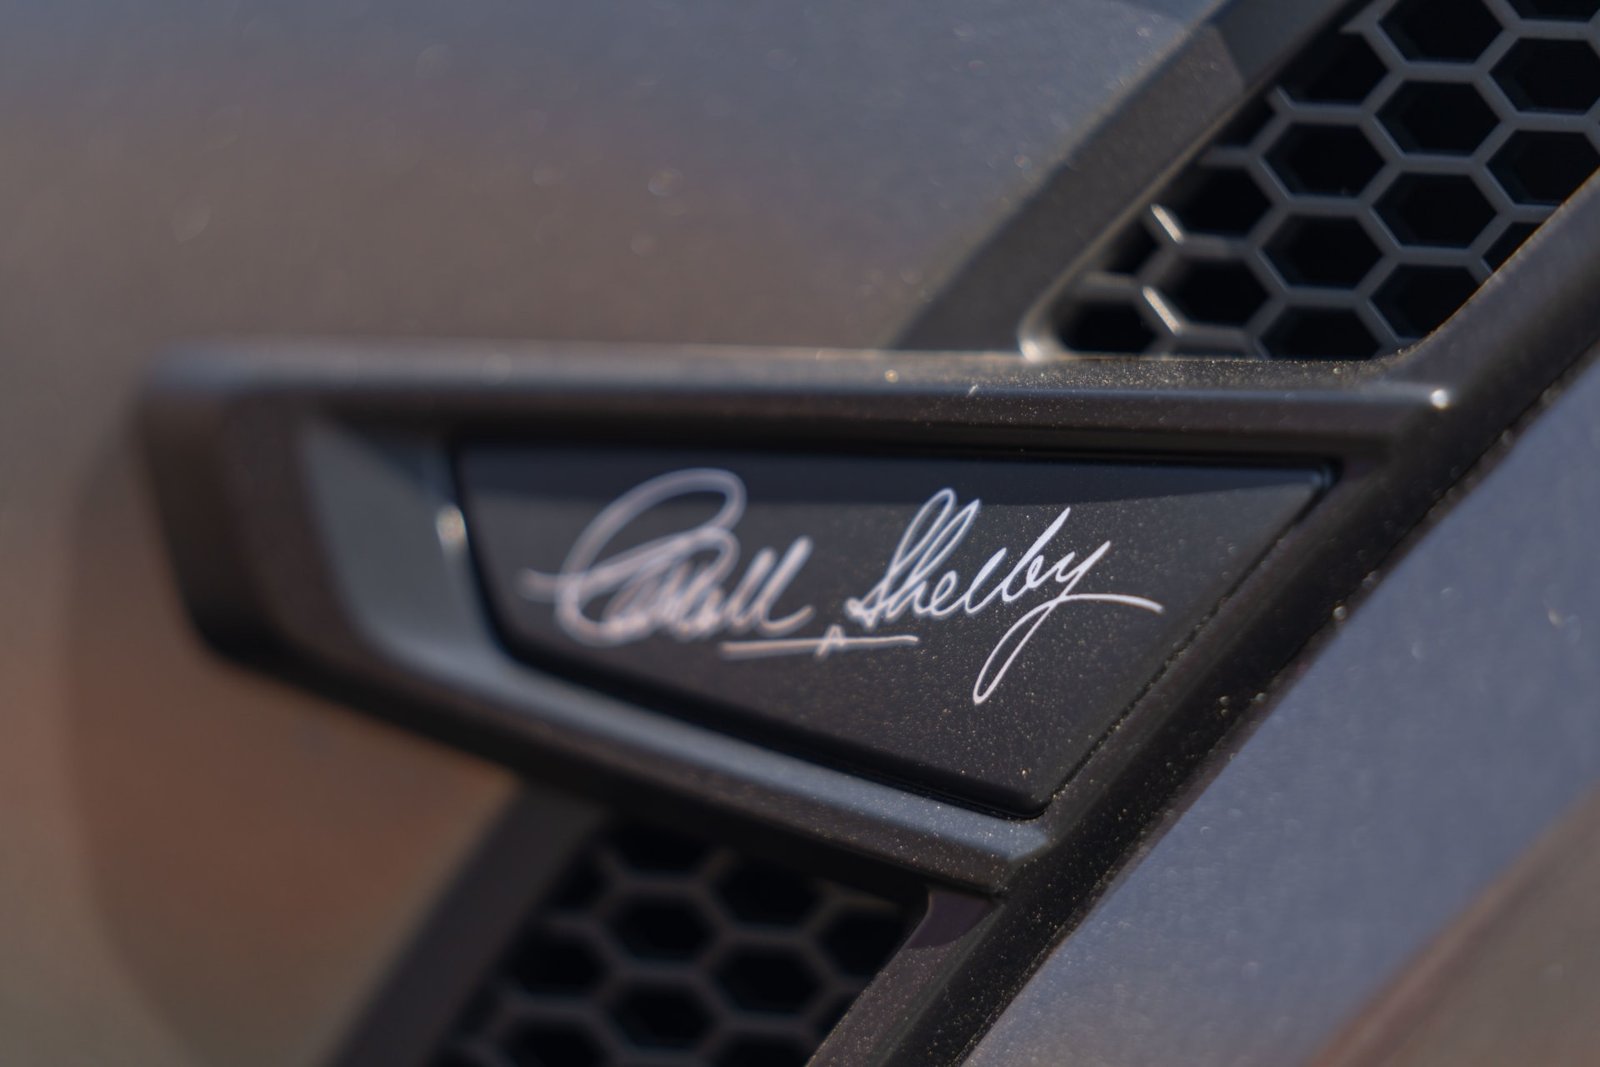 2020 Ford Carroll Shelby Signature Series (24)